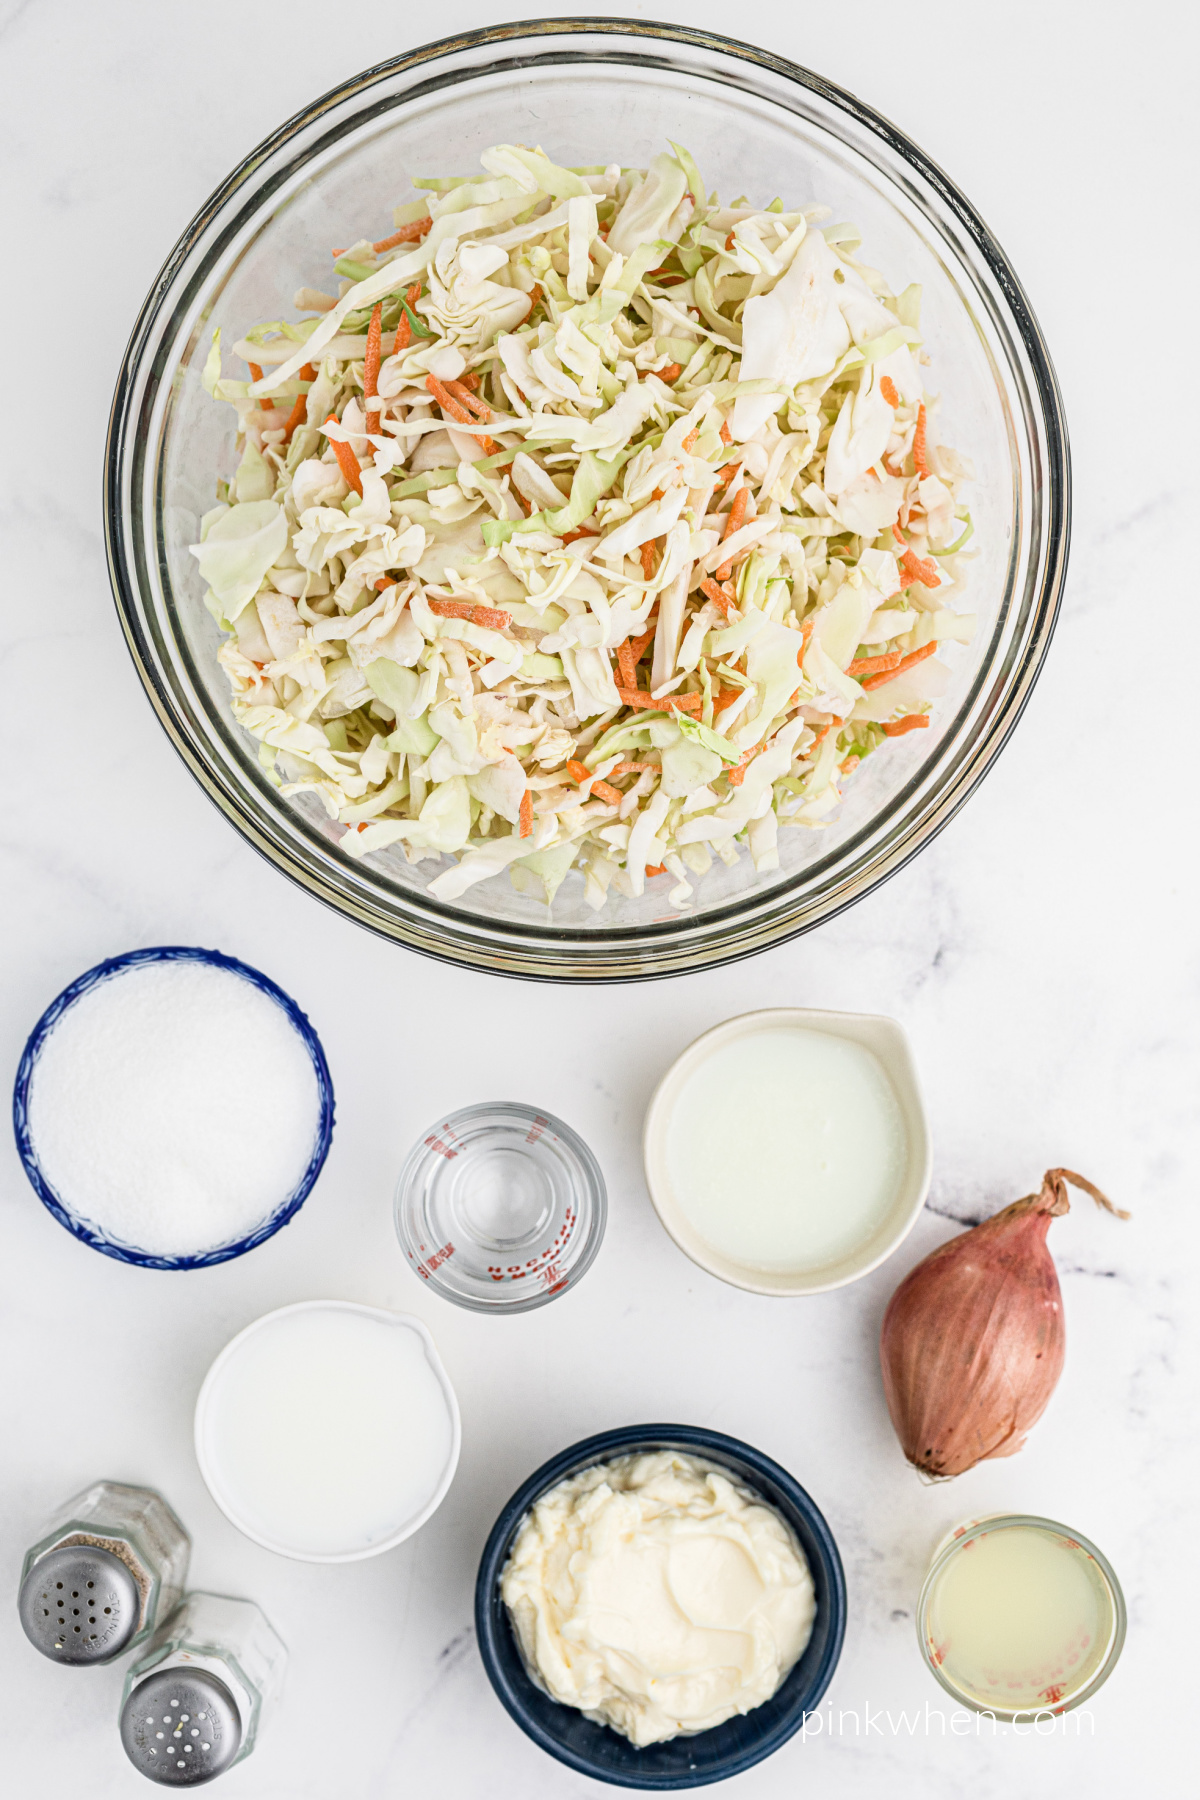 Shredded cabbage and ingredients needed to make copycat KFC coleslaw.